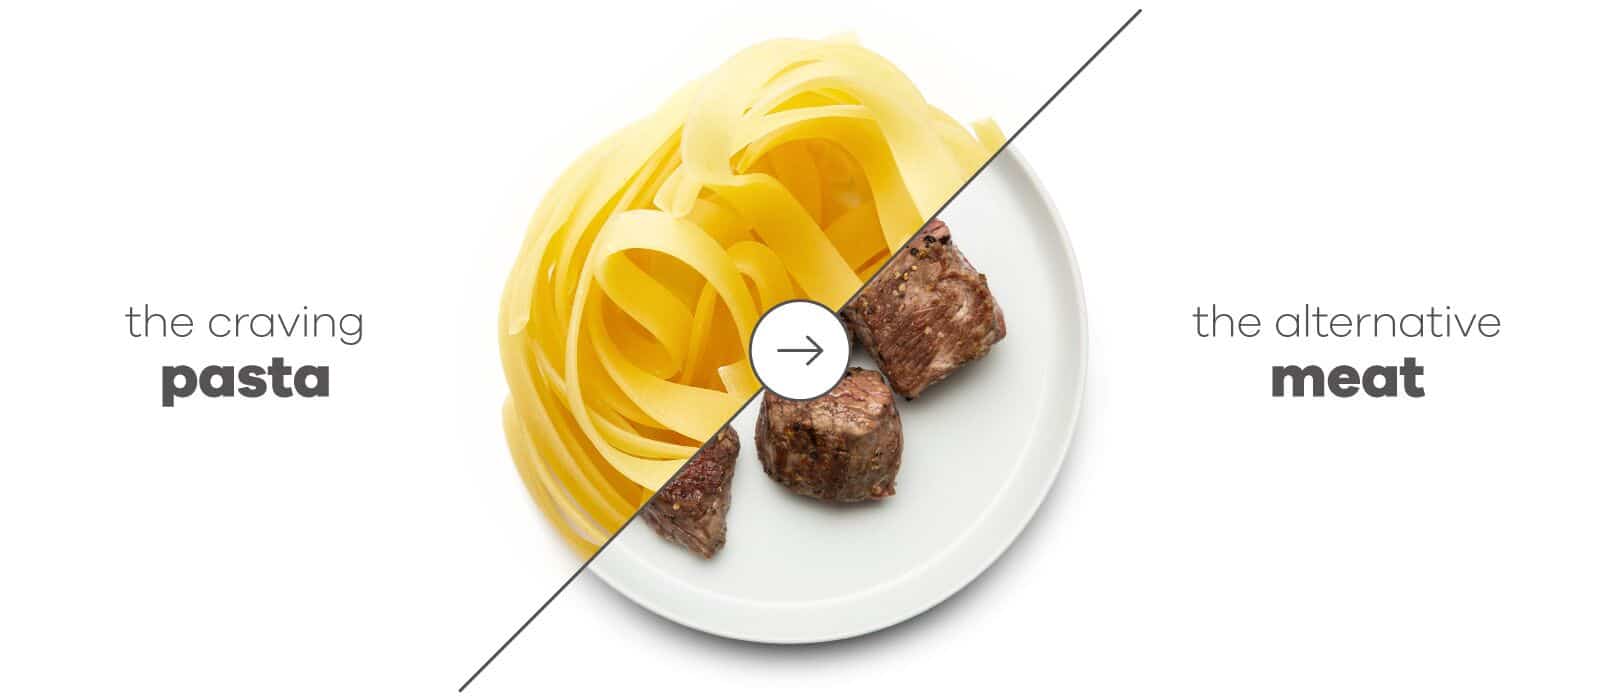 pasta and meat together and nutrition comparison